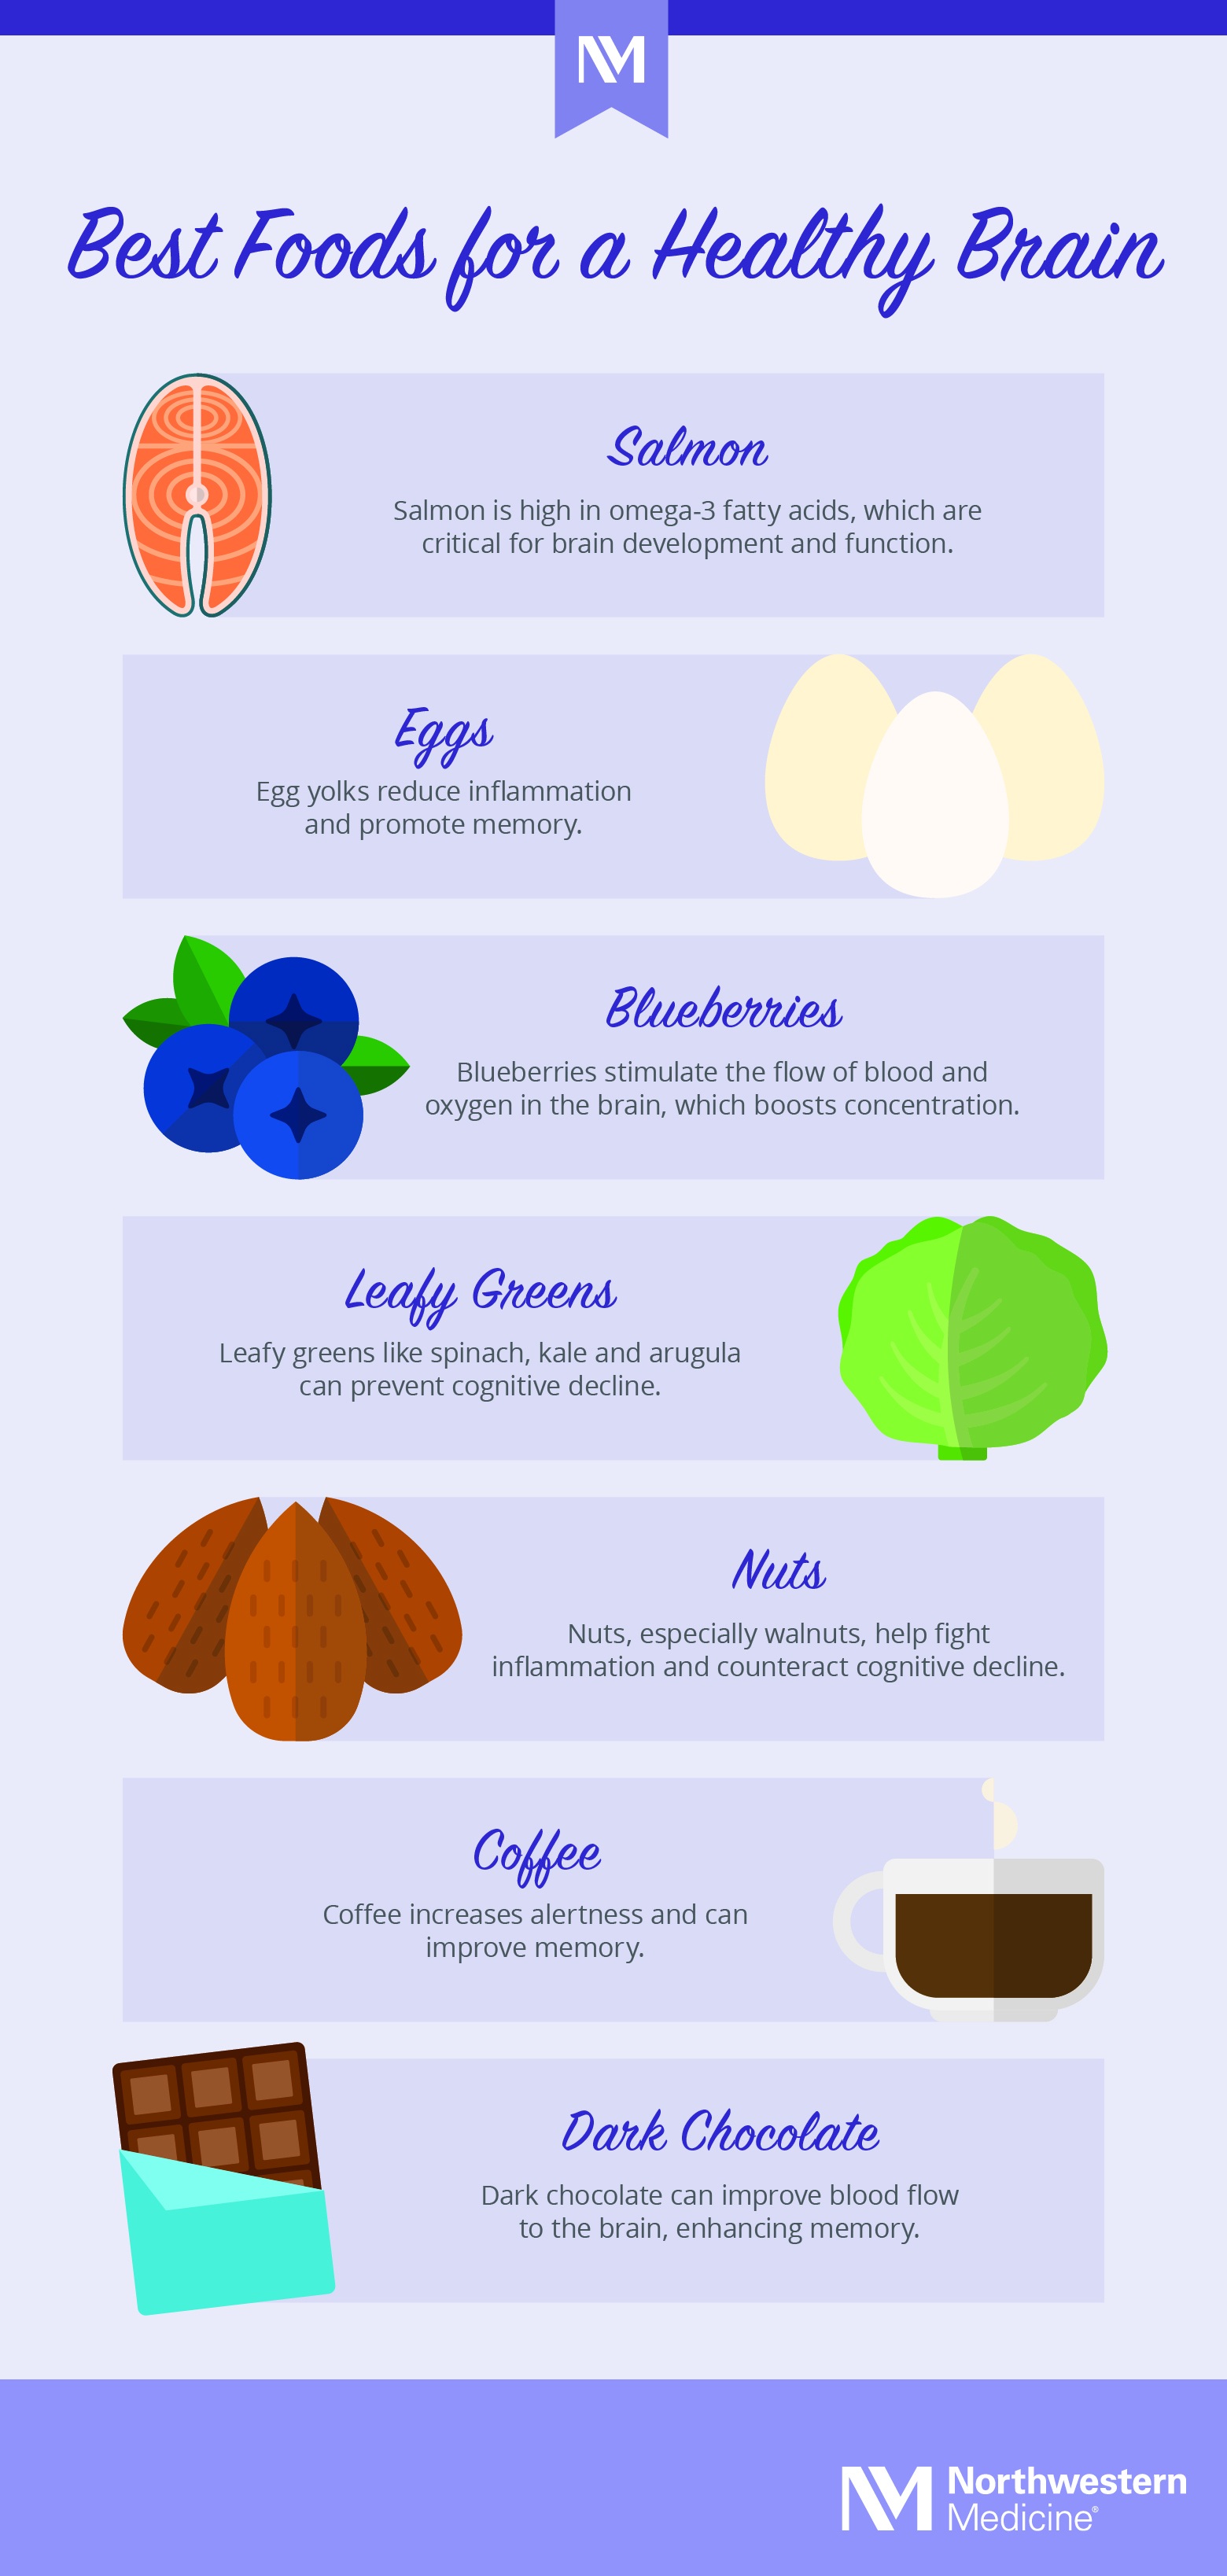 Best Foods for a Healthy Brain infographic